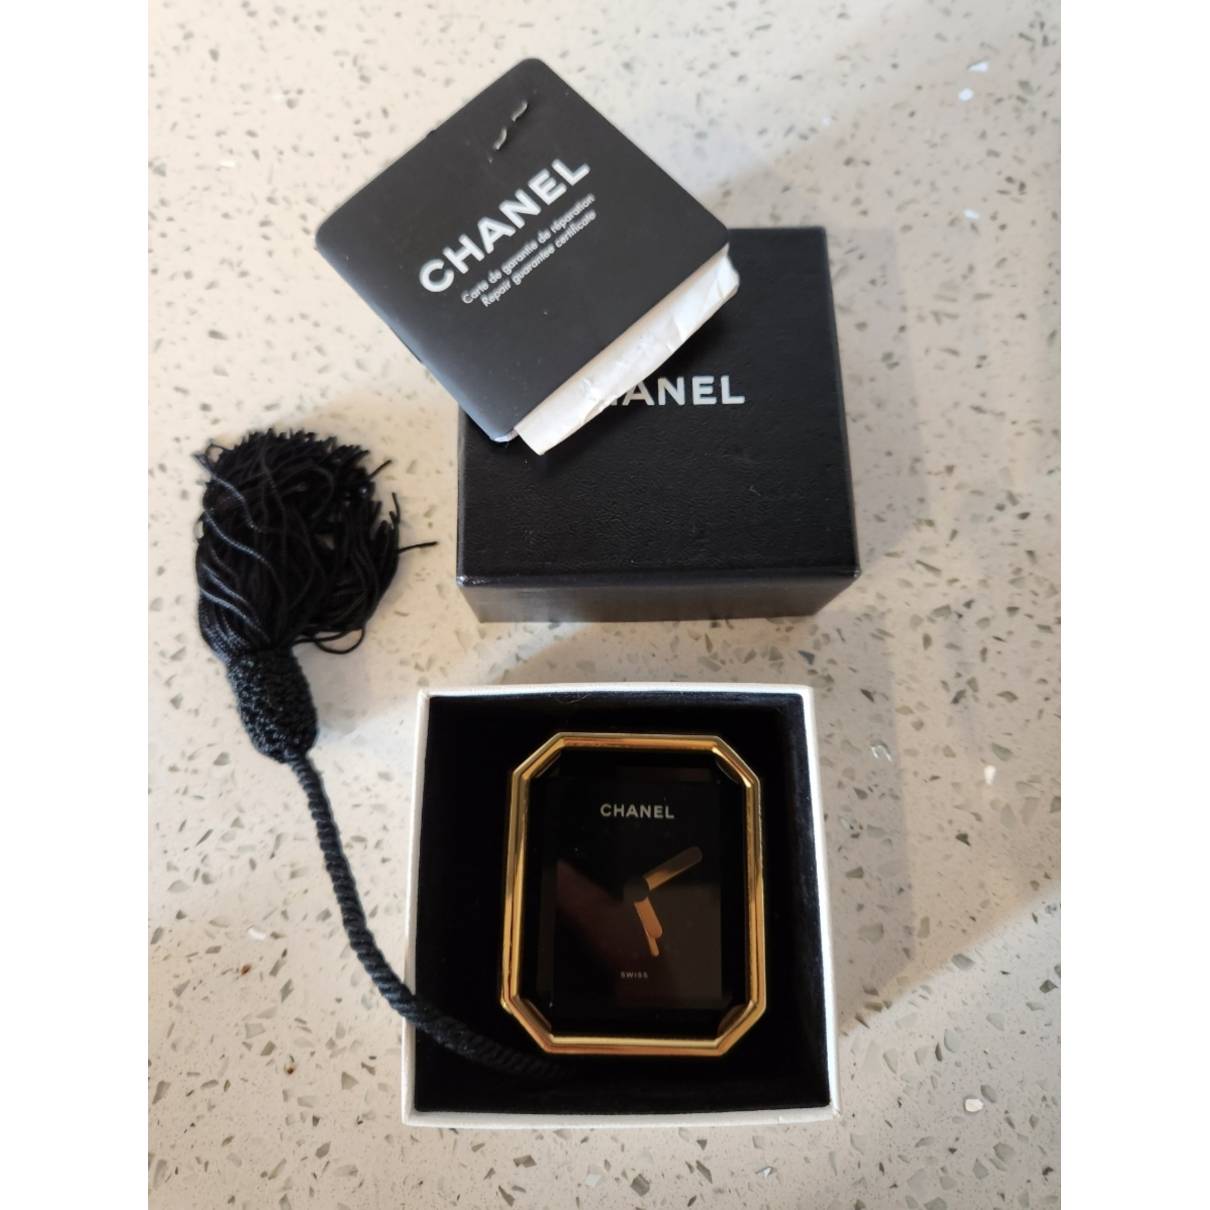 Chanel - Authenticated Watch - Gold Plated Gold For Woman, Very Good Condition